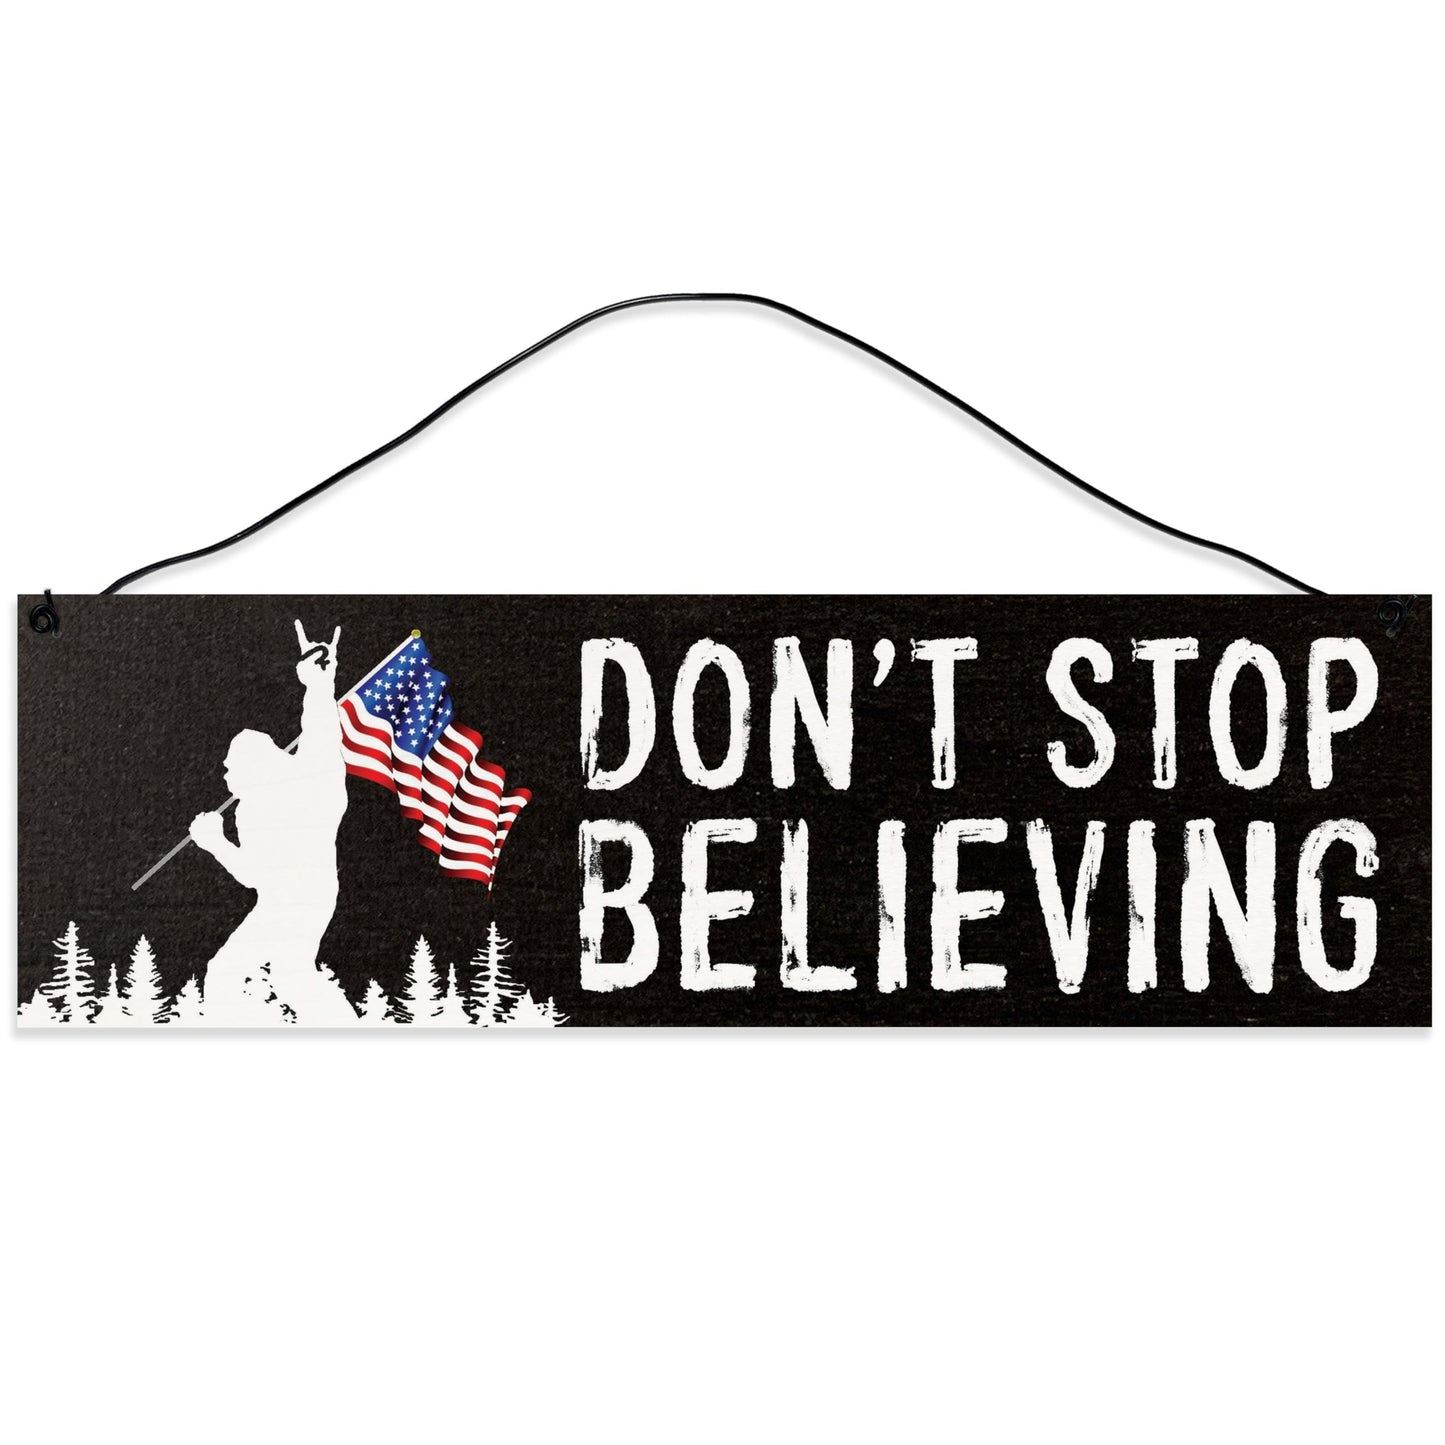 Don't Stop Believing | Big Foot | Sasquatch | Yeti | Handmade | Wood Sign | Wire Hanger/Stand | UV Printed | Solid Maple